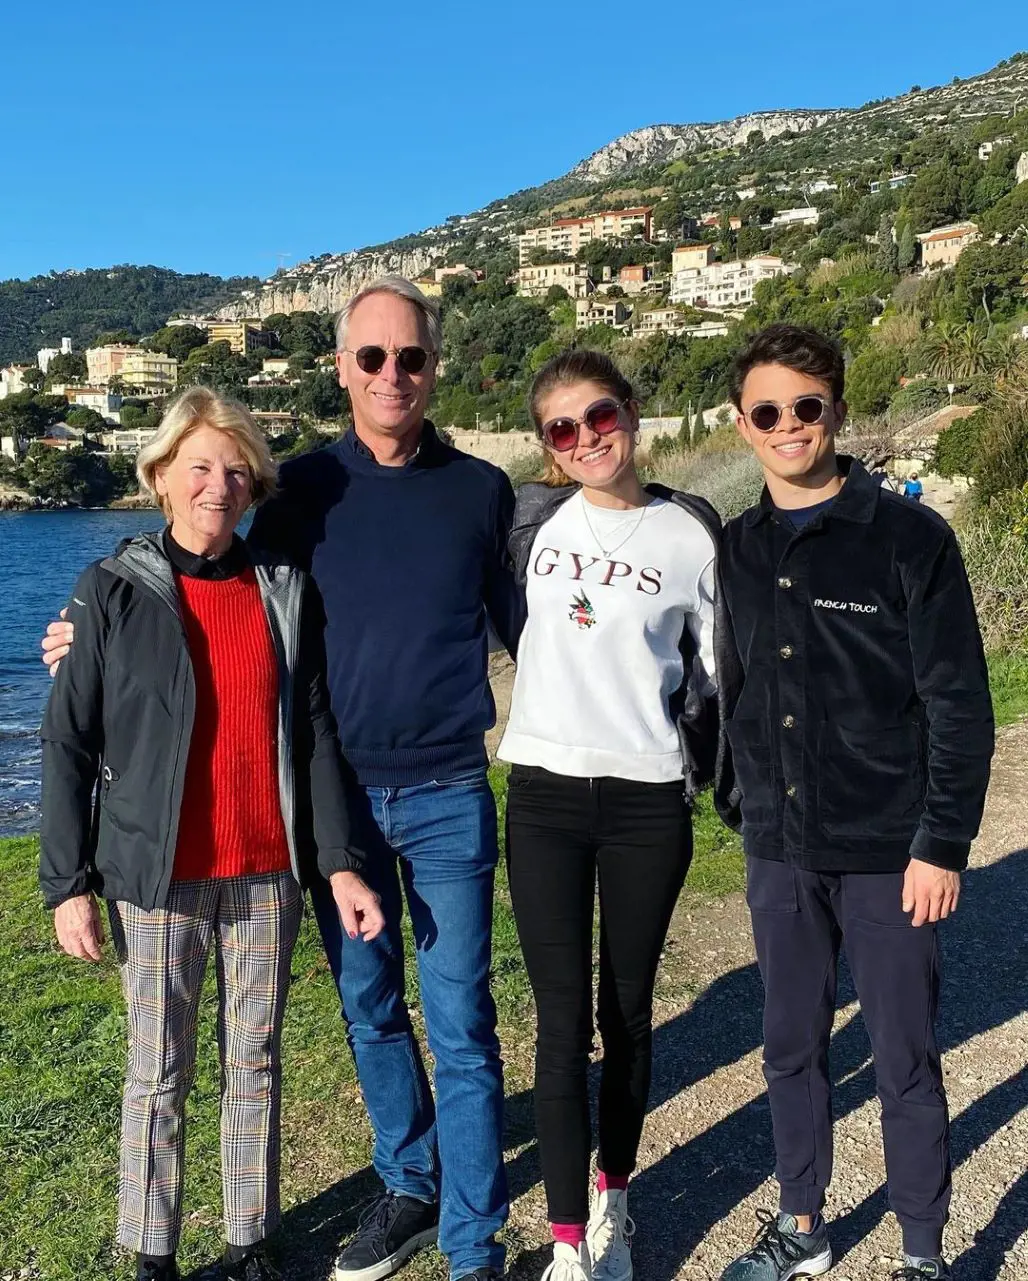 Nyck upload family picture in Monaco, JANUARY 3, 2021 